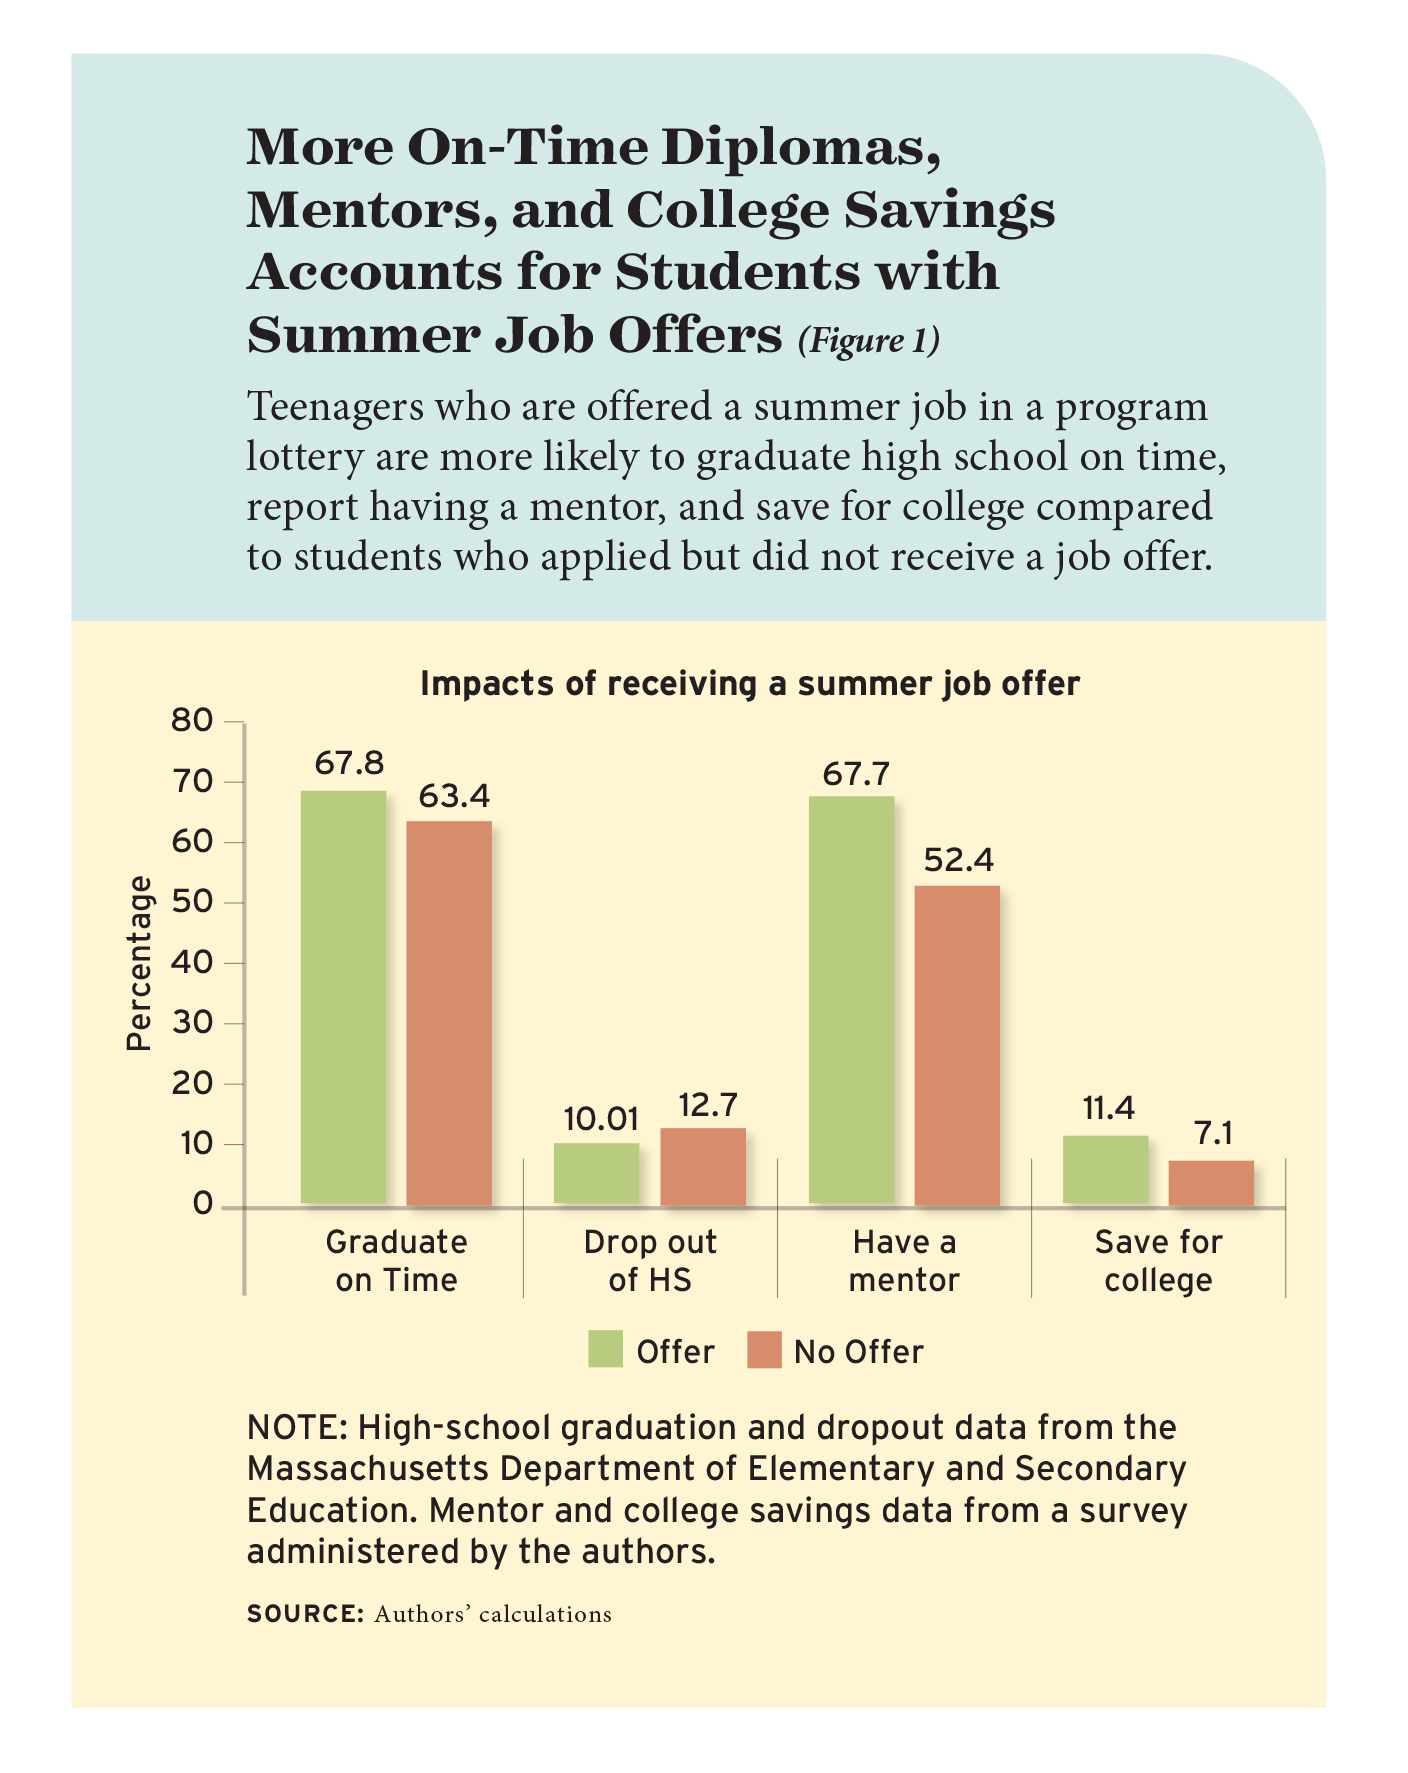 Figure 1: More On-Time Diplomas, Mentors, and College Savings Accounts for Students with Accounts for Students with Summer Job Offers